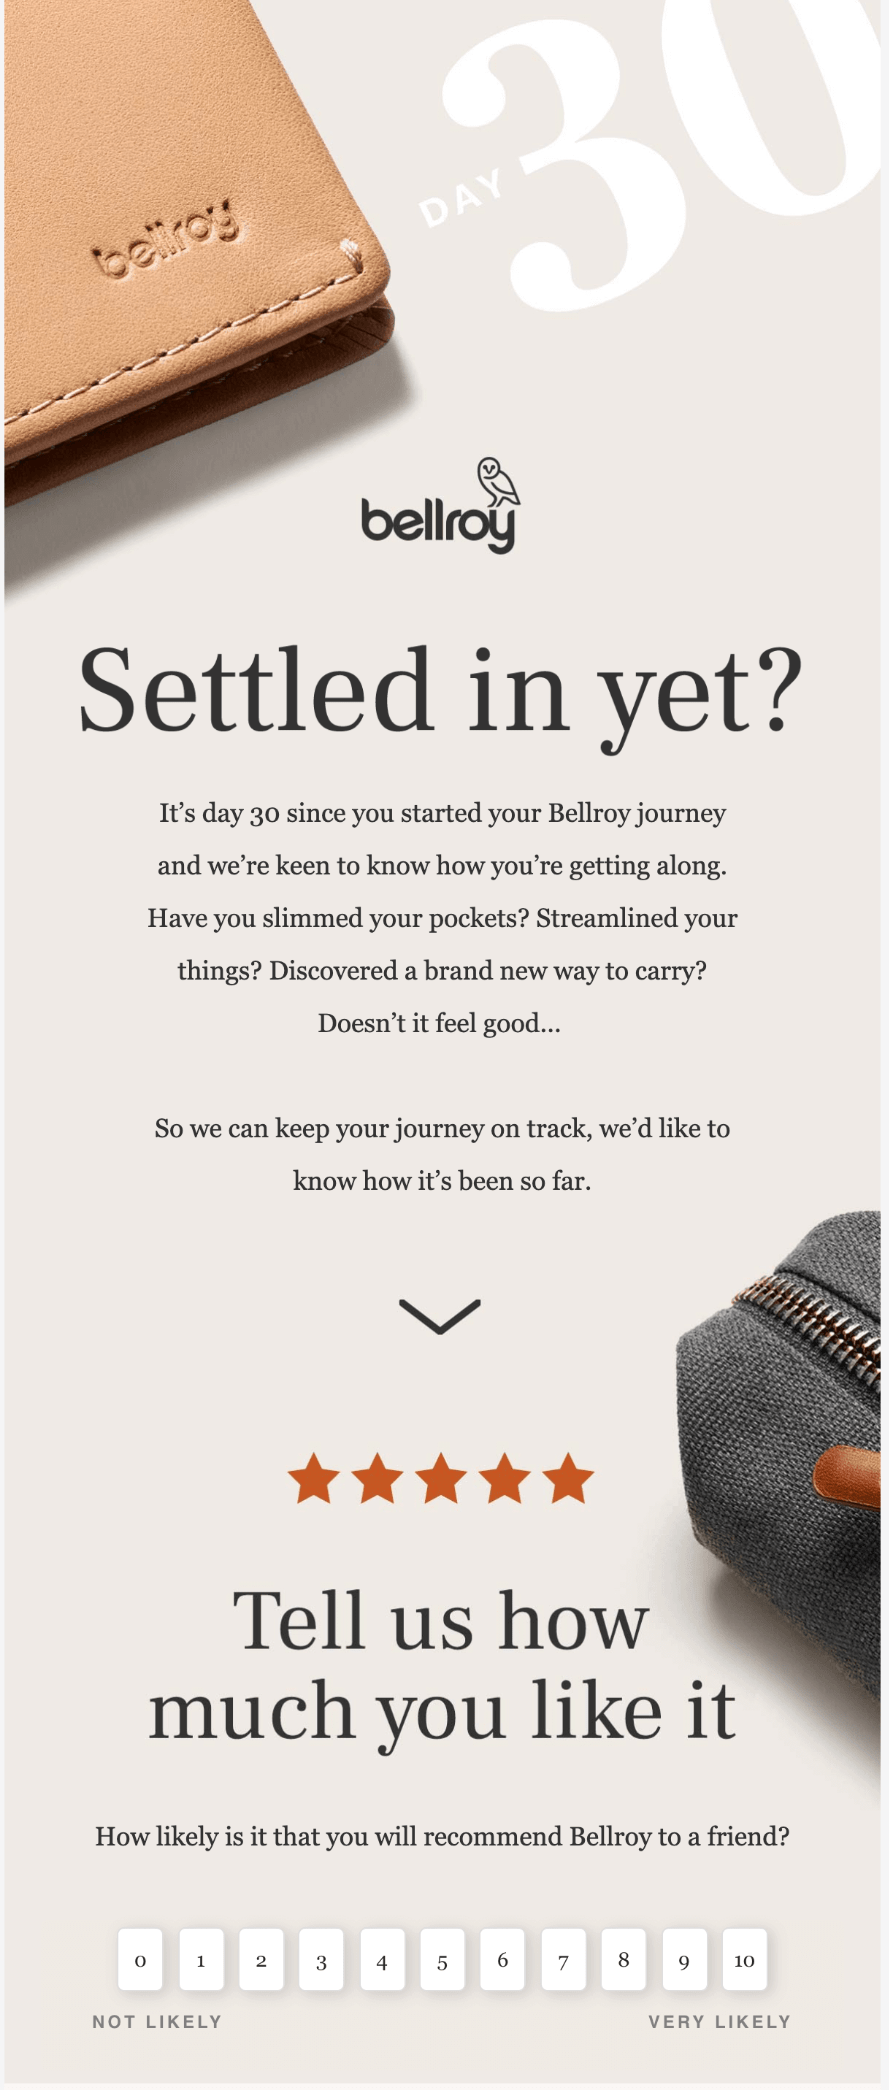 An email newsletter by Bellroy which includes an embedded survey. Survey asks "how likely is it that you will recommend Bellroy to a friend?" and allows readers to select a box from 1 to 10.